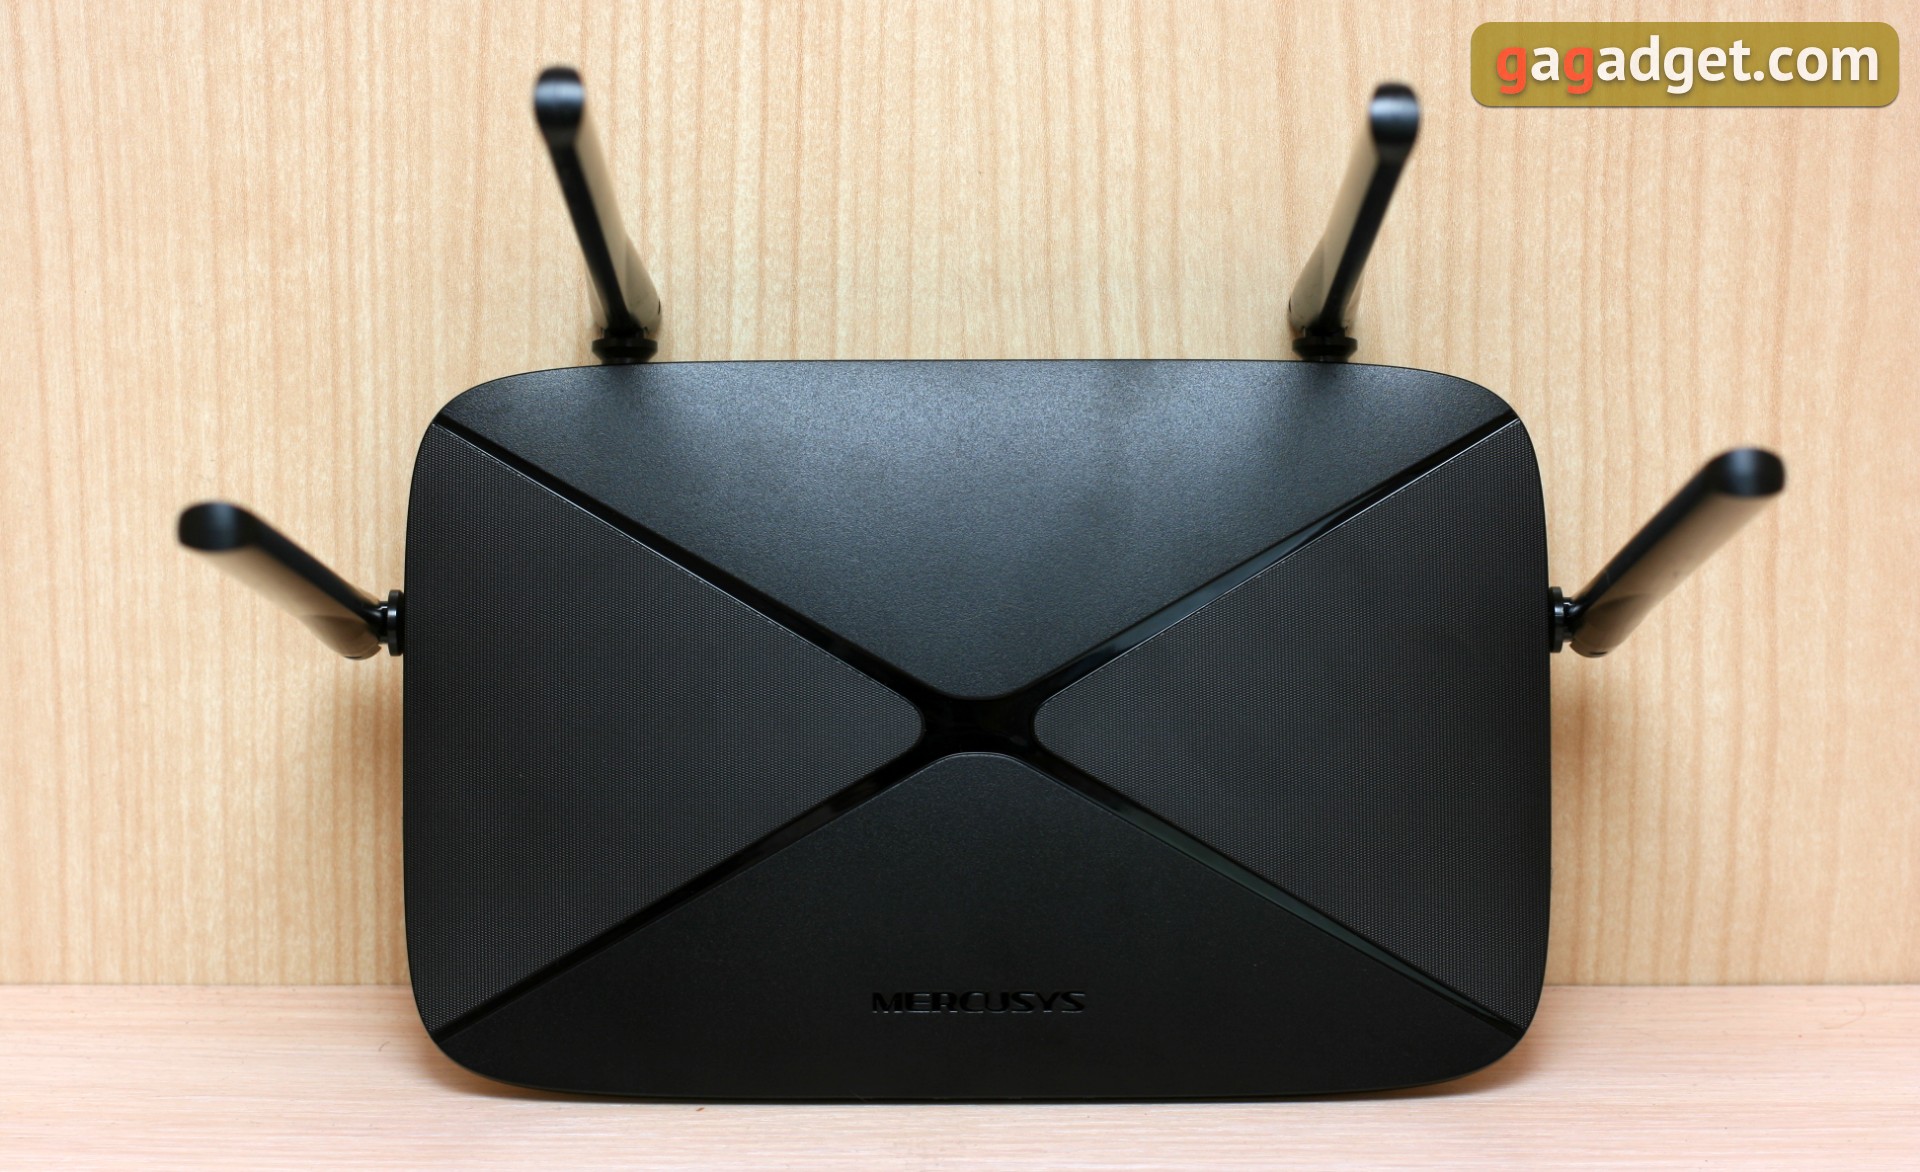 Mercusys AC12G AC1200 Wireless Router Review